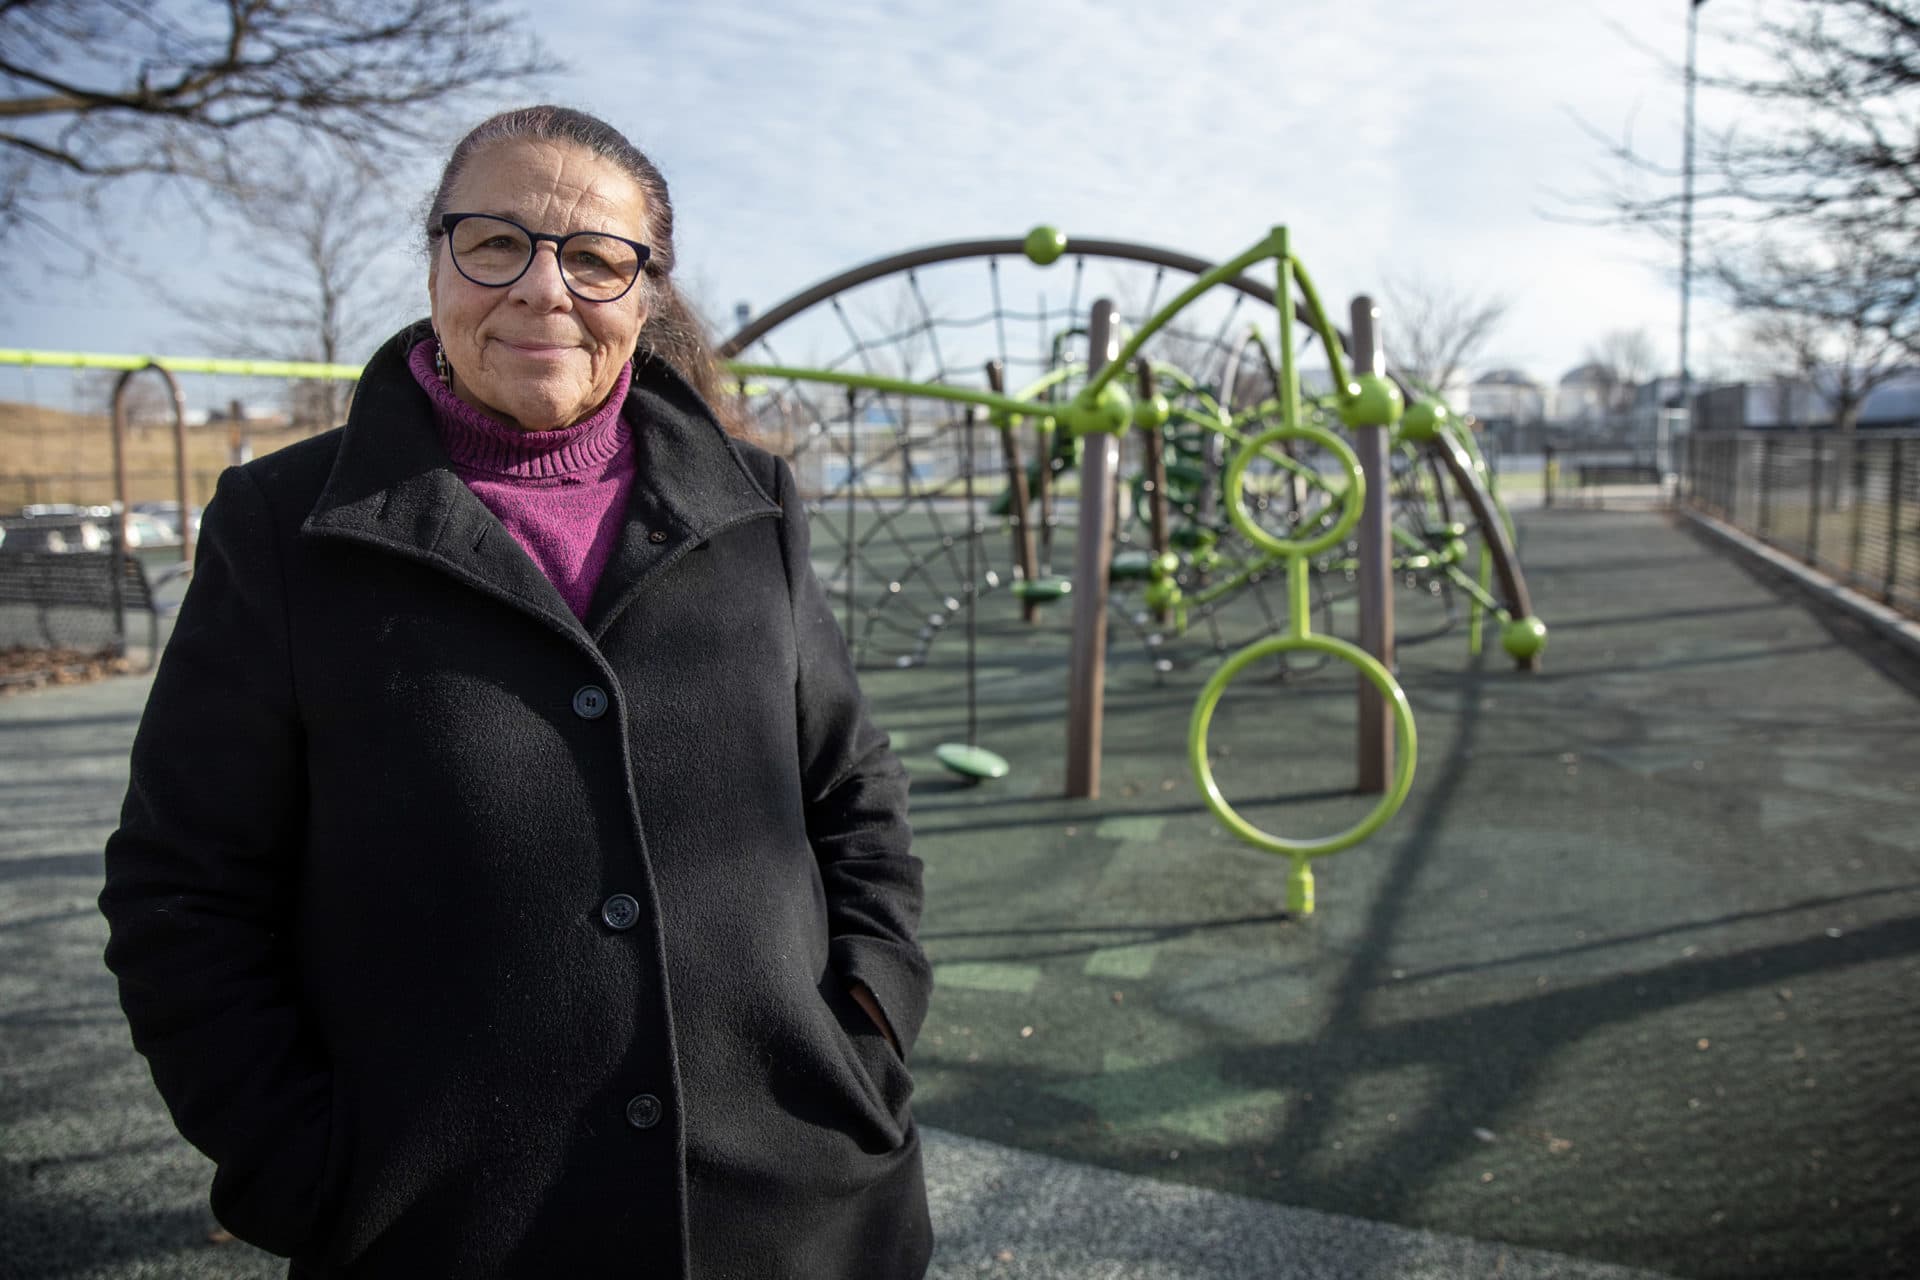 East Boston resident Debra Cave stands by the climbing frames at American Legion Playground. (Robin Lubbock/WBUR)